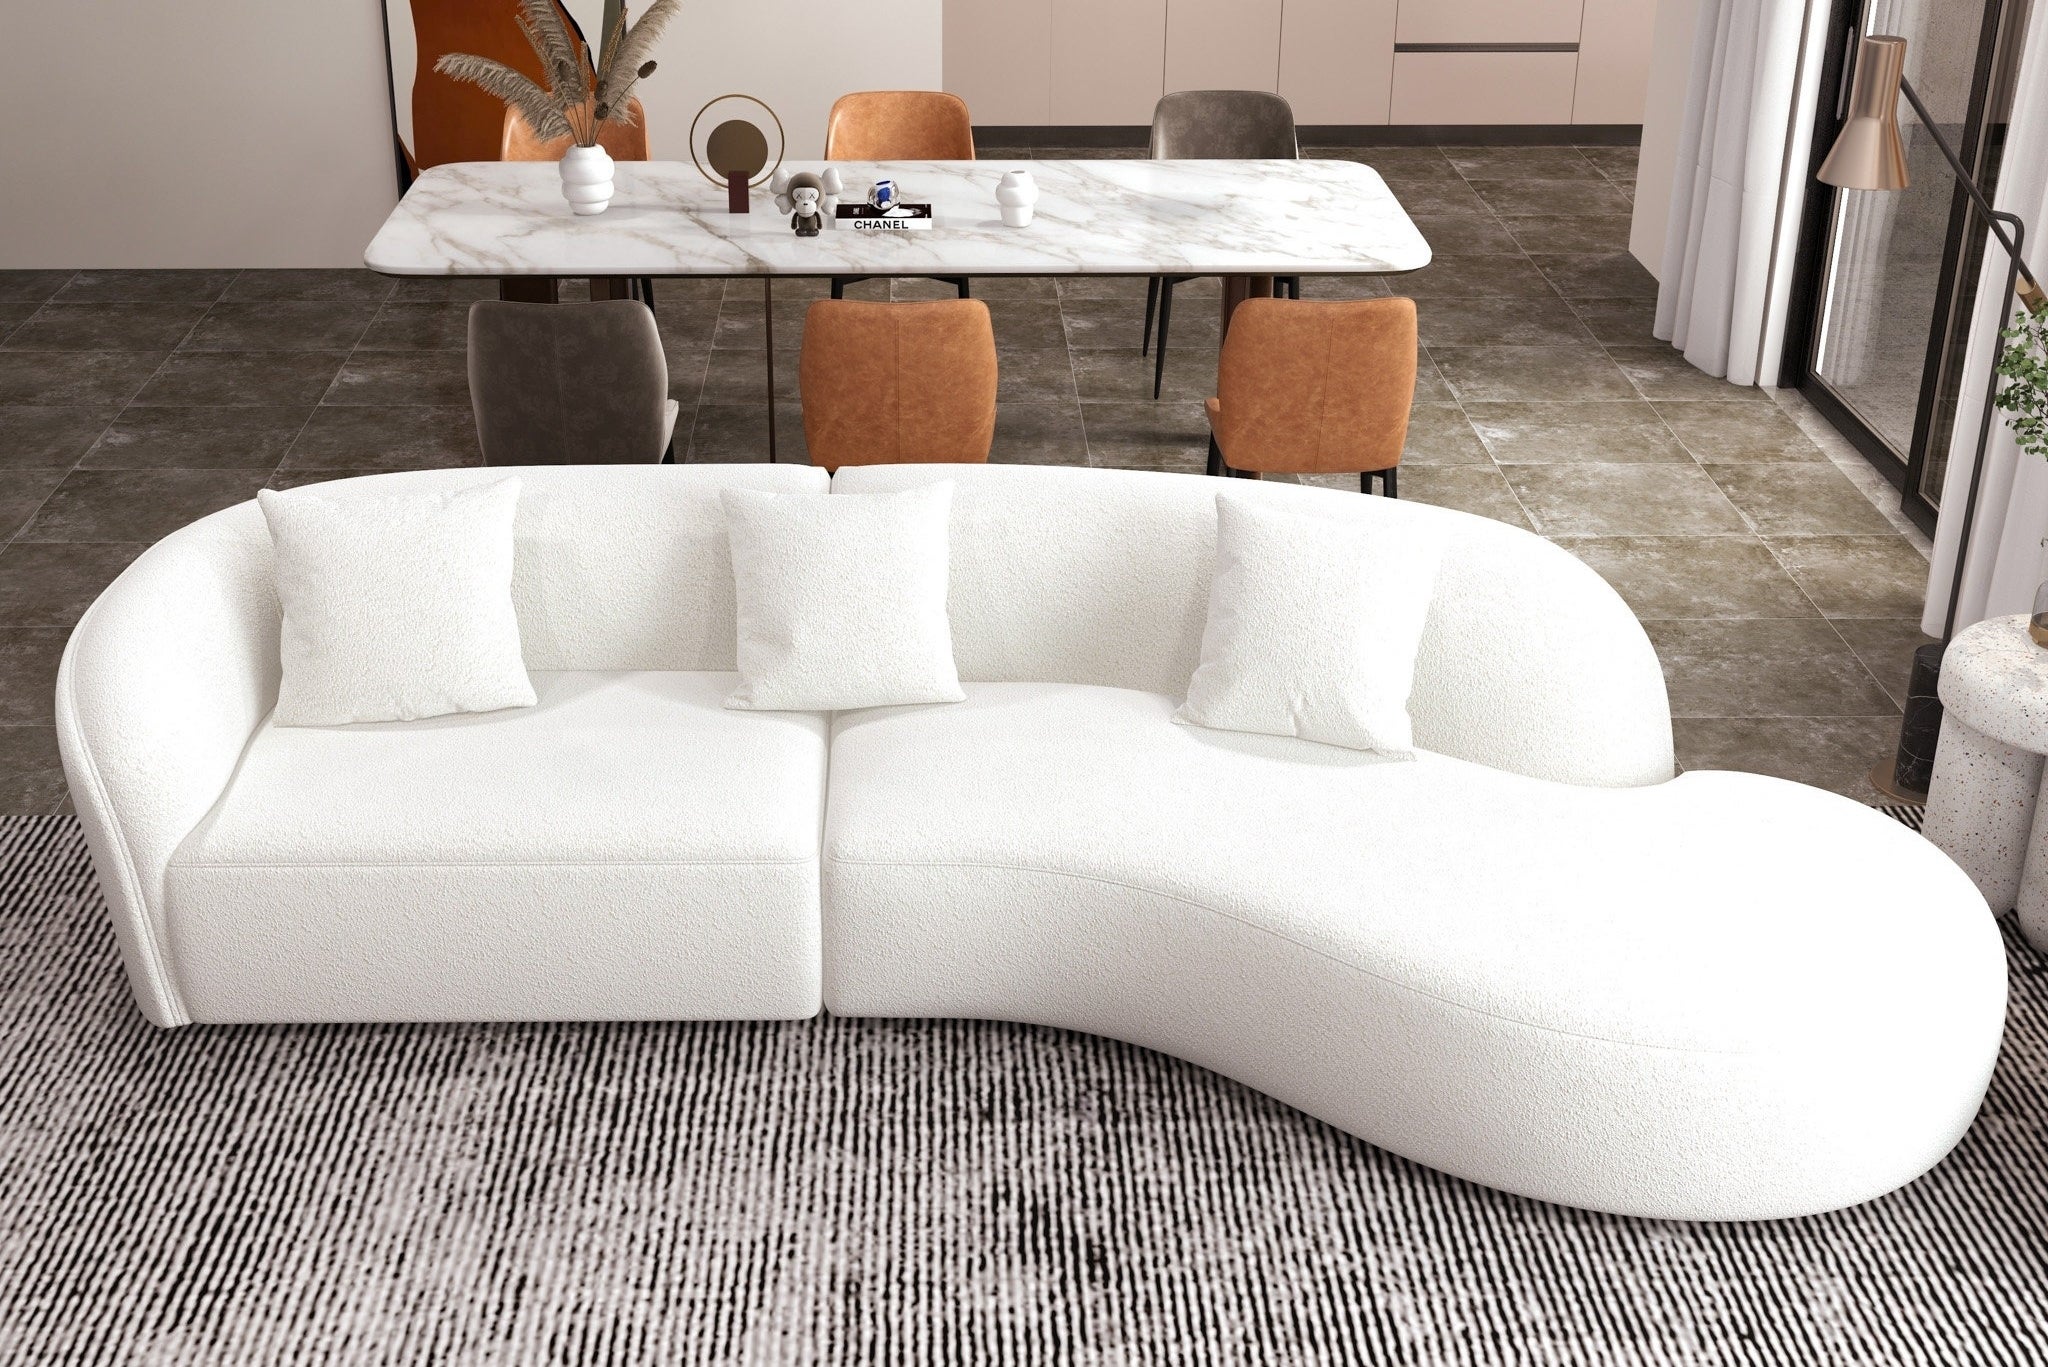 An irregularly shaped white sectional is shown